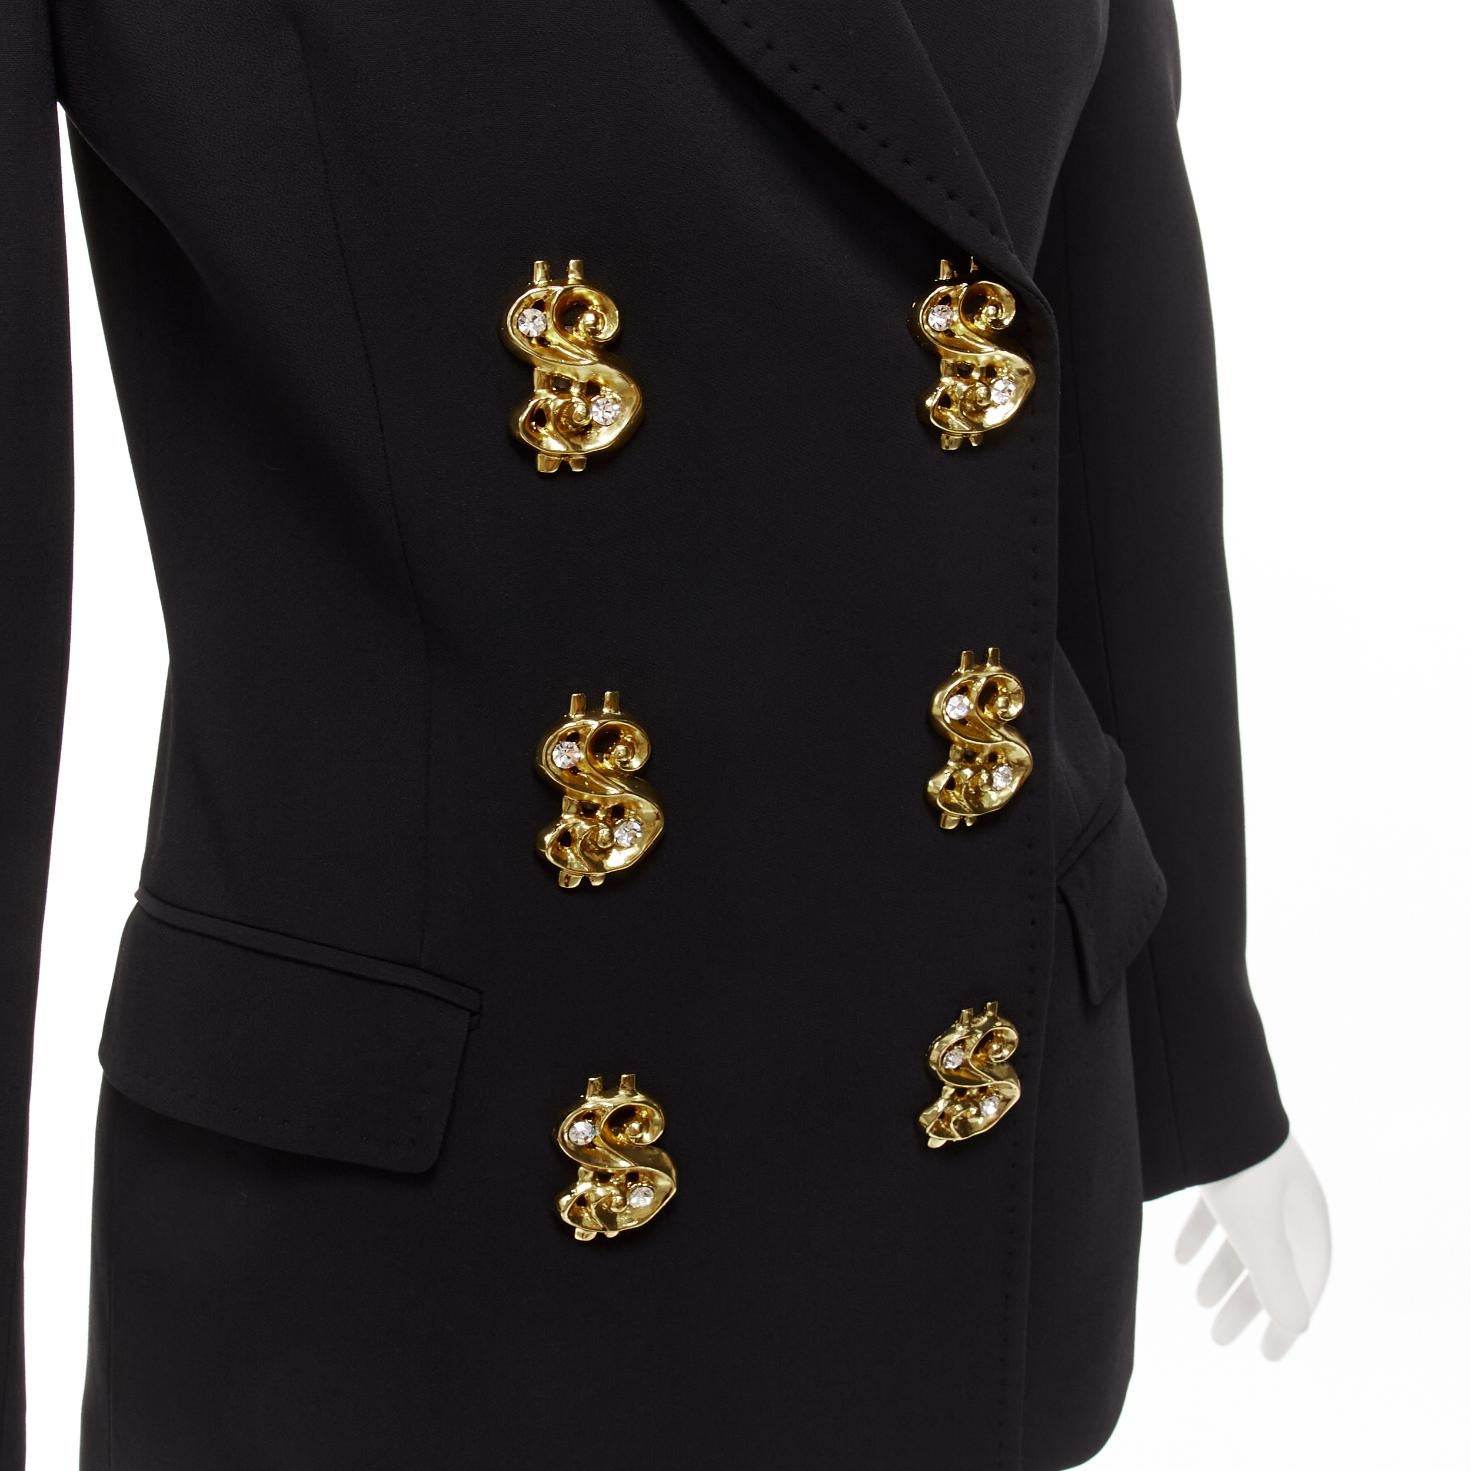 rare MOSCHINO Runway black gold crystal dollar sign button blazer jacket IT40 S
Reference: TGAS/D01115
Brand: Moschino
Designer: Jeremy Scott
Material: Viscose, Blend
Color: Black, Gold
Pattern: Solid
Closure: Snap Buttons
Lining: Black Fabric
Extra